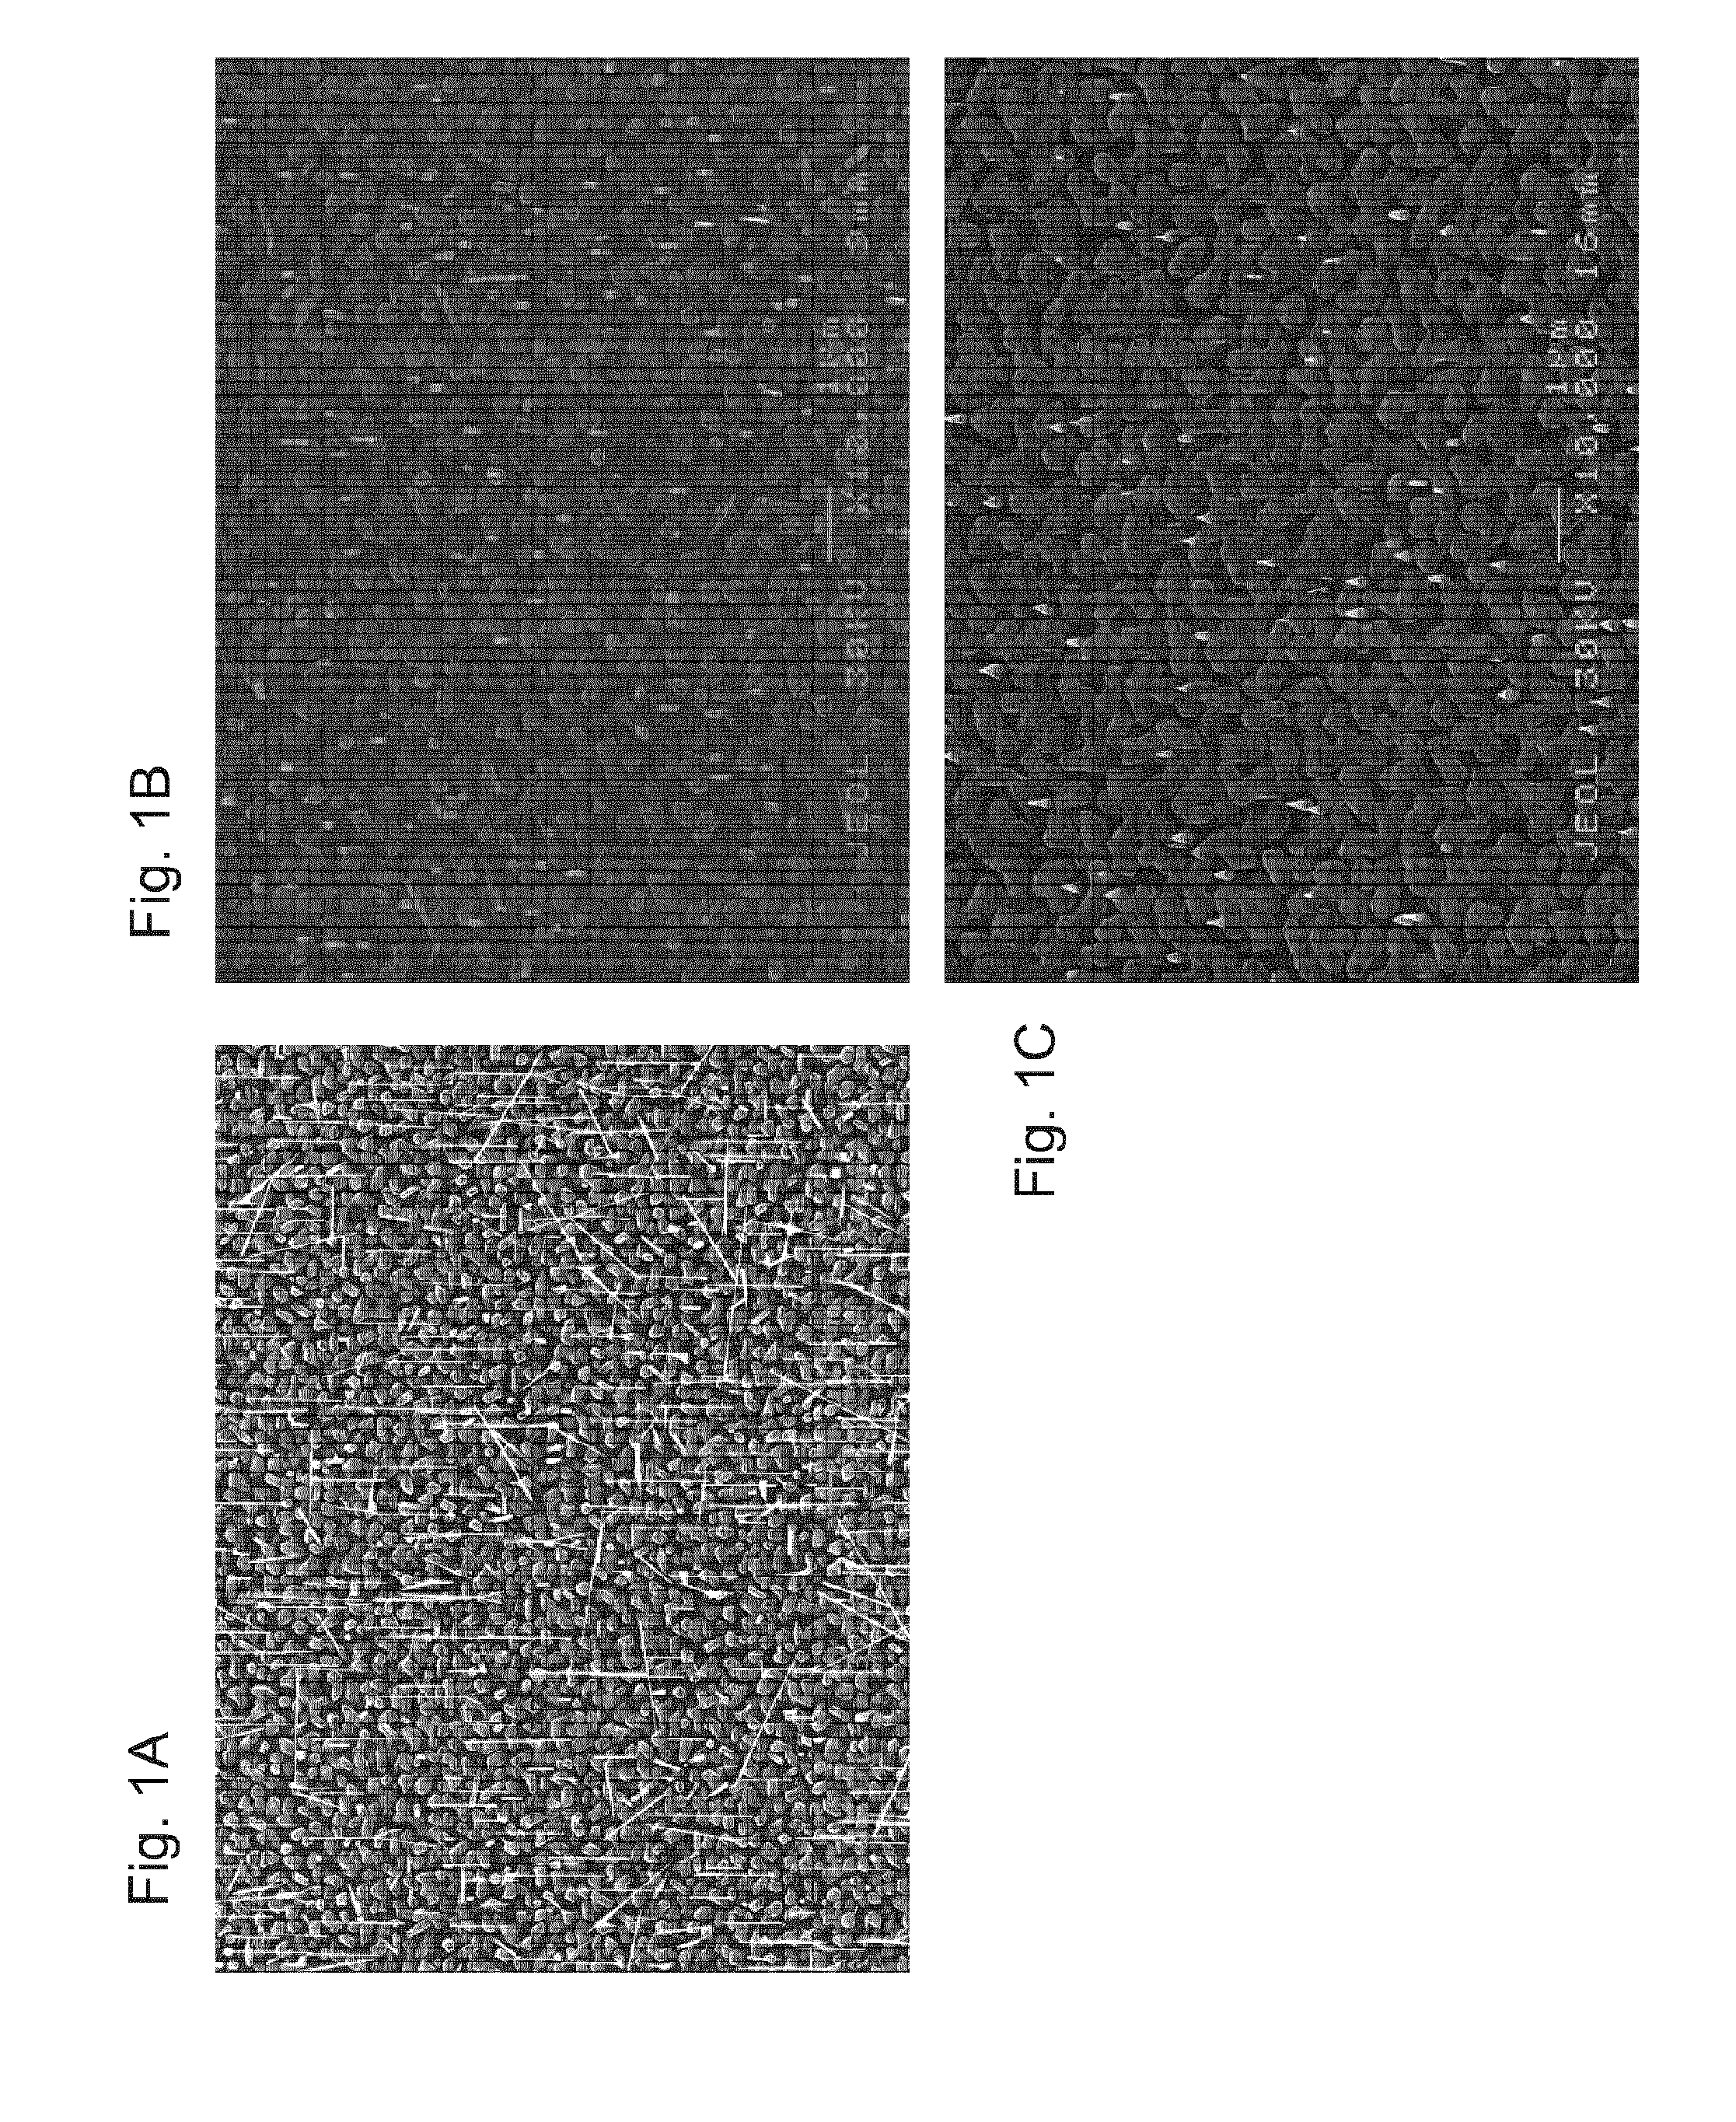 Nanostructure, nanostructure fabrication method, and photovoltaic cell incorporating a nanostructure